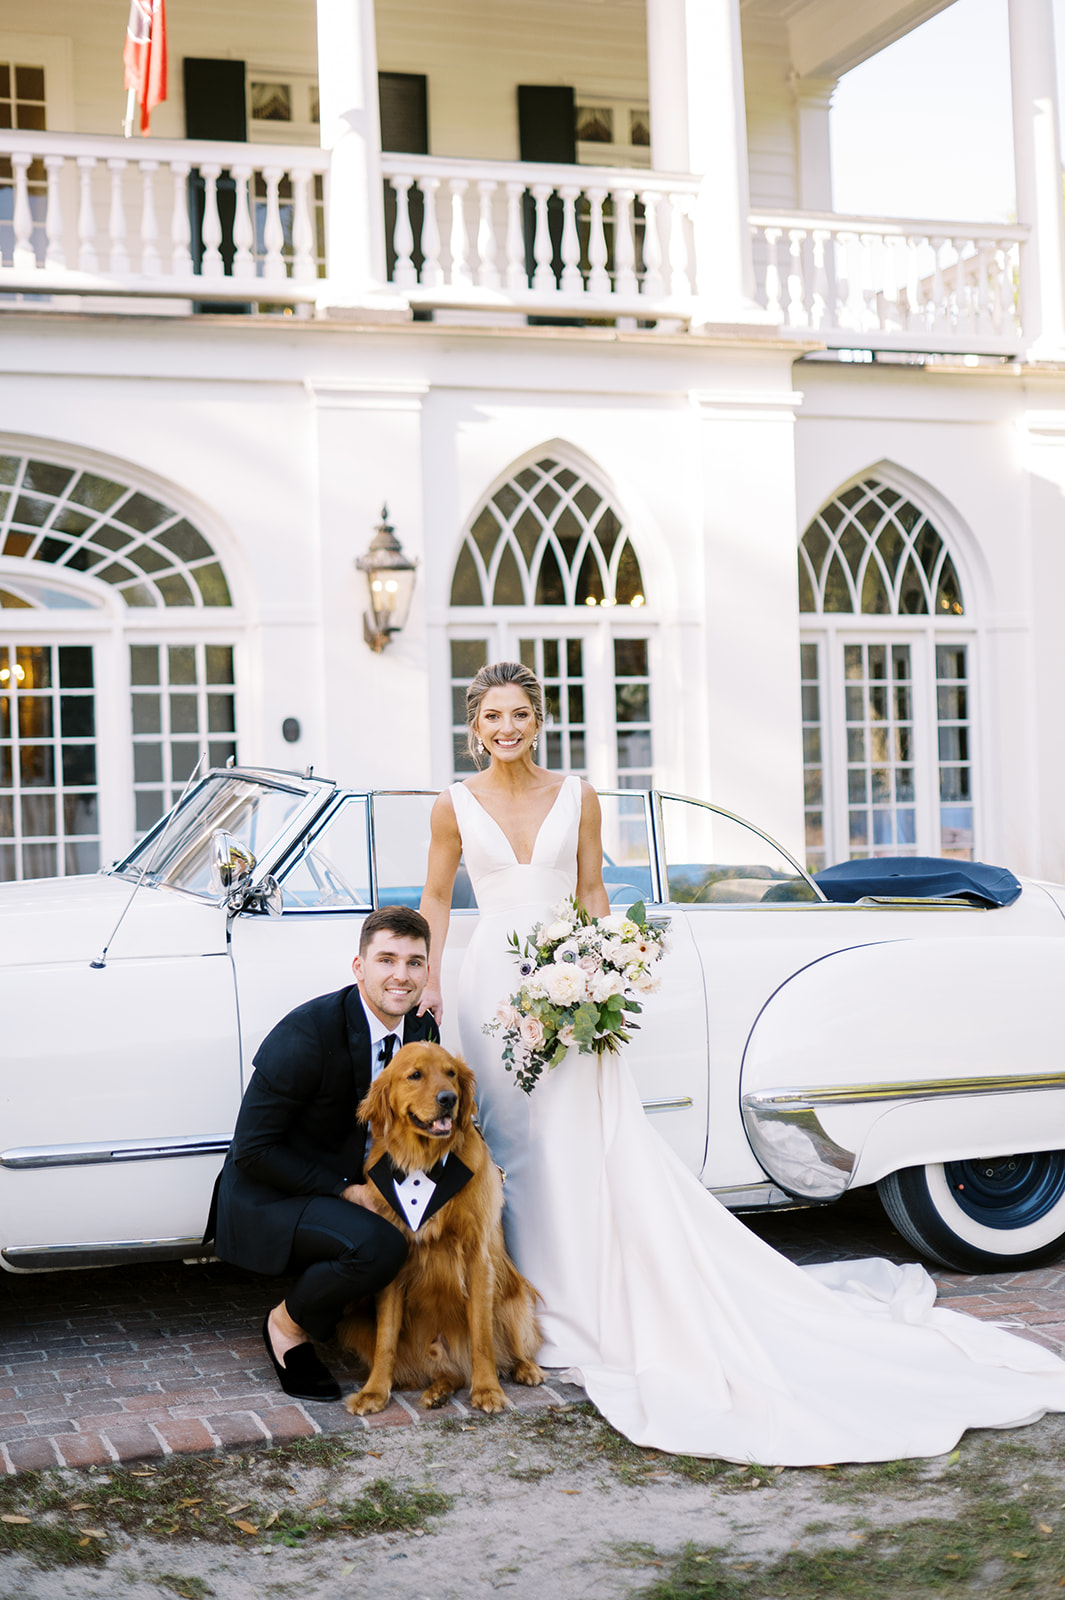 bride and groom at lowndes grove in charleston